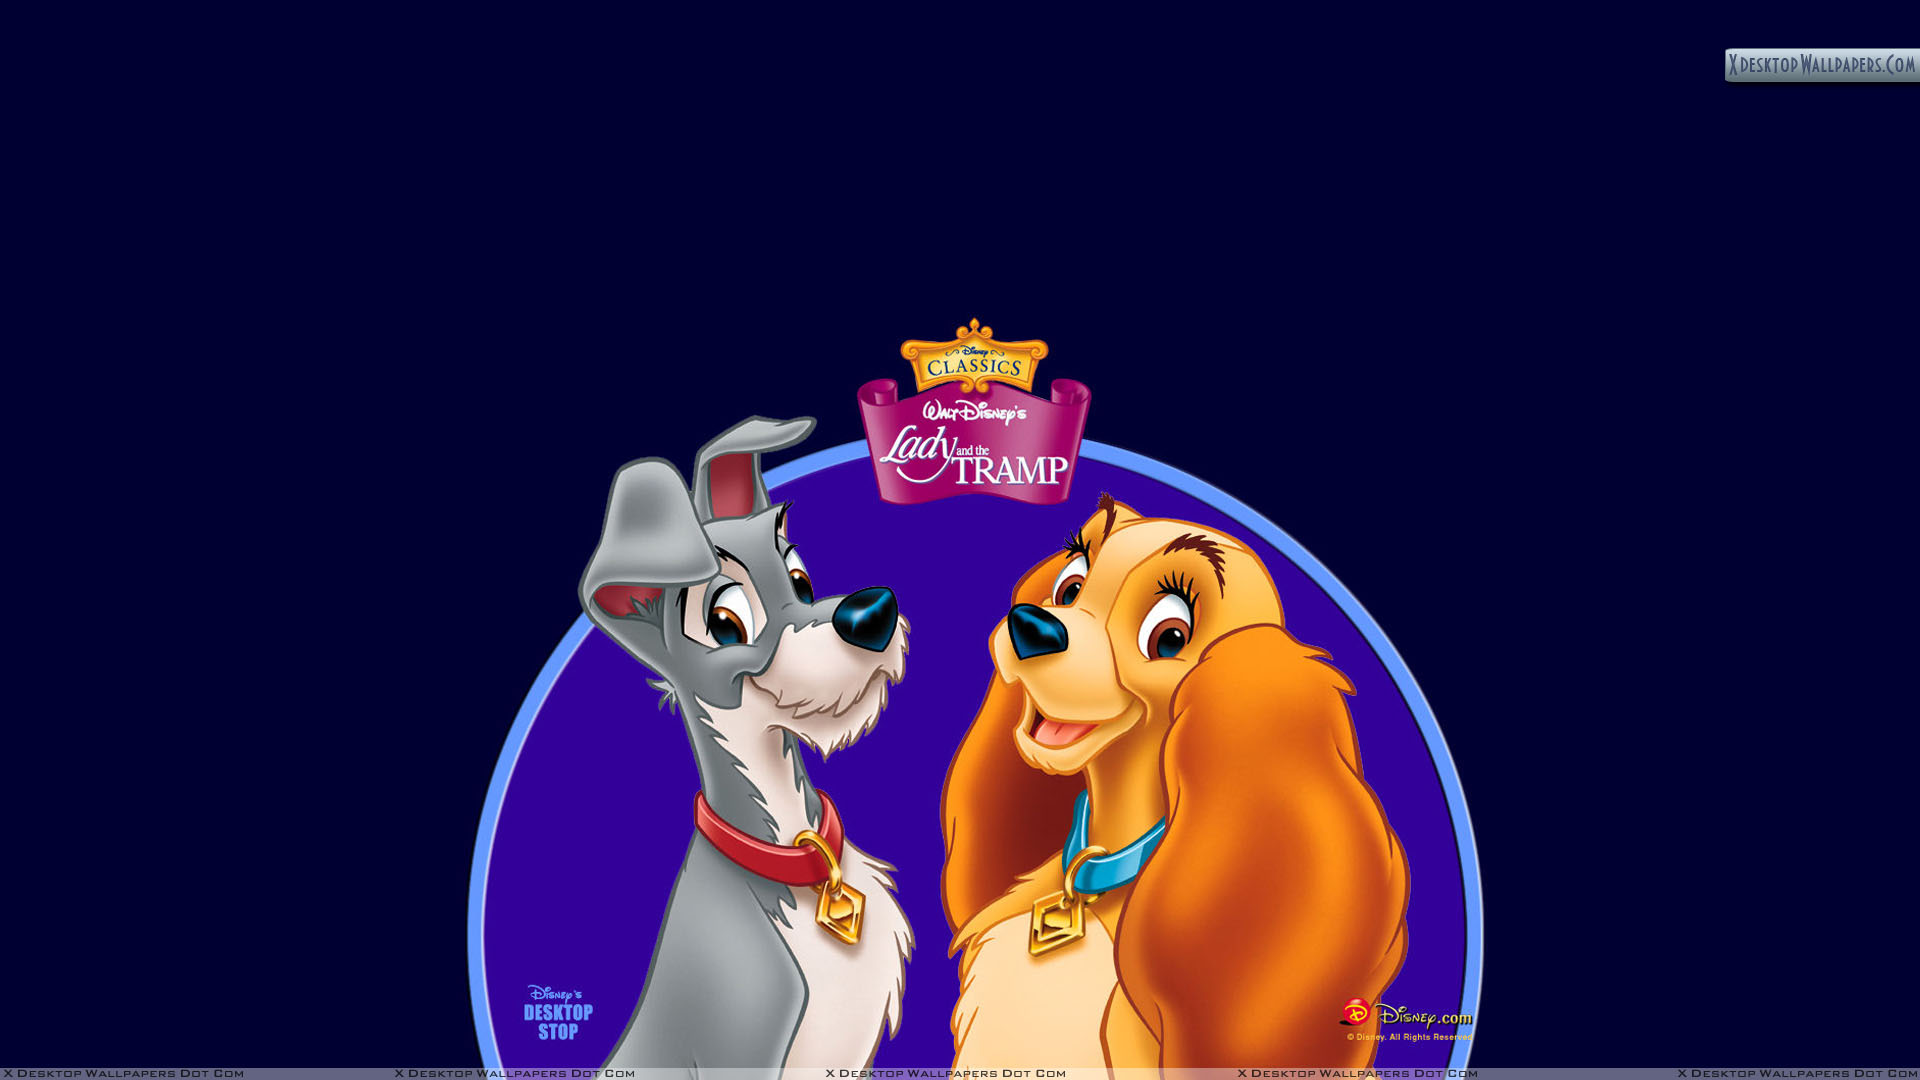 Lady And The Tramp Wallpaper Photos Image In HD